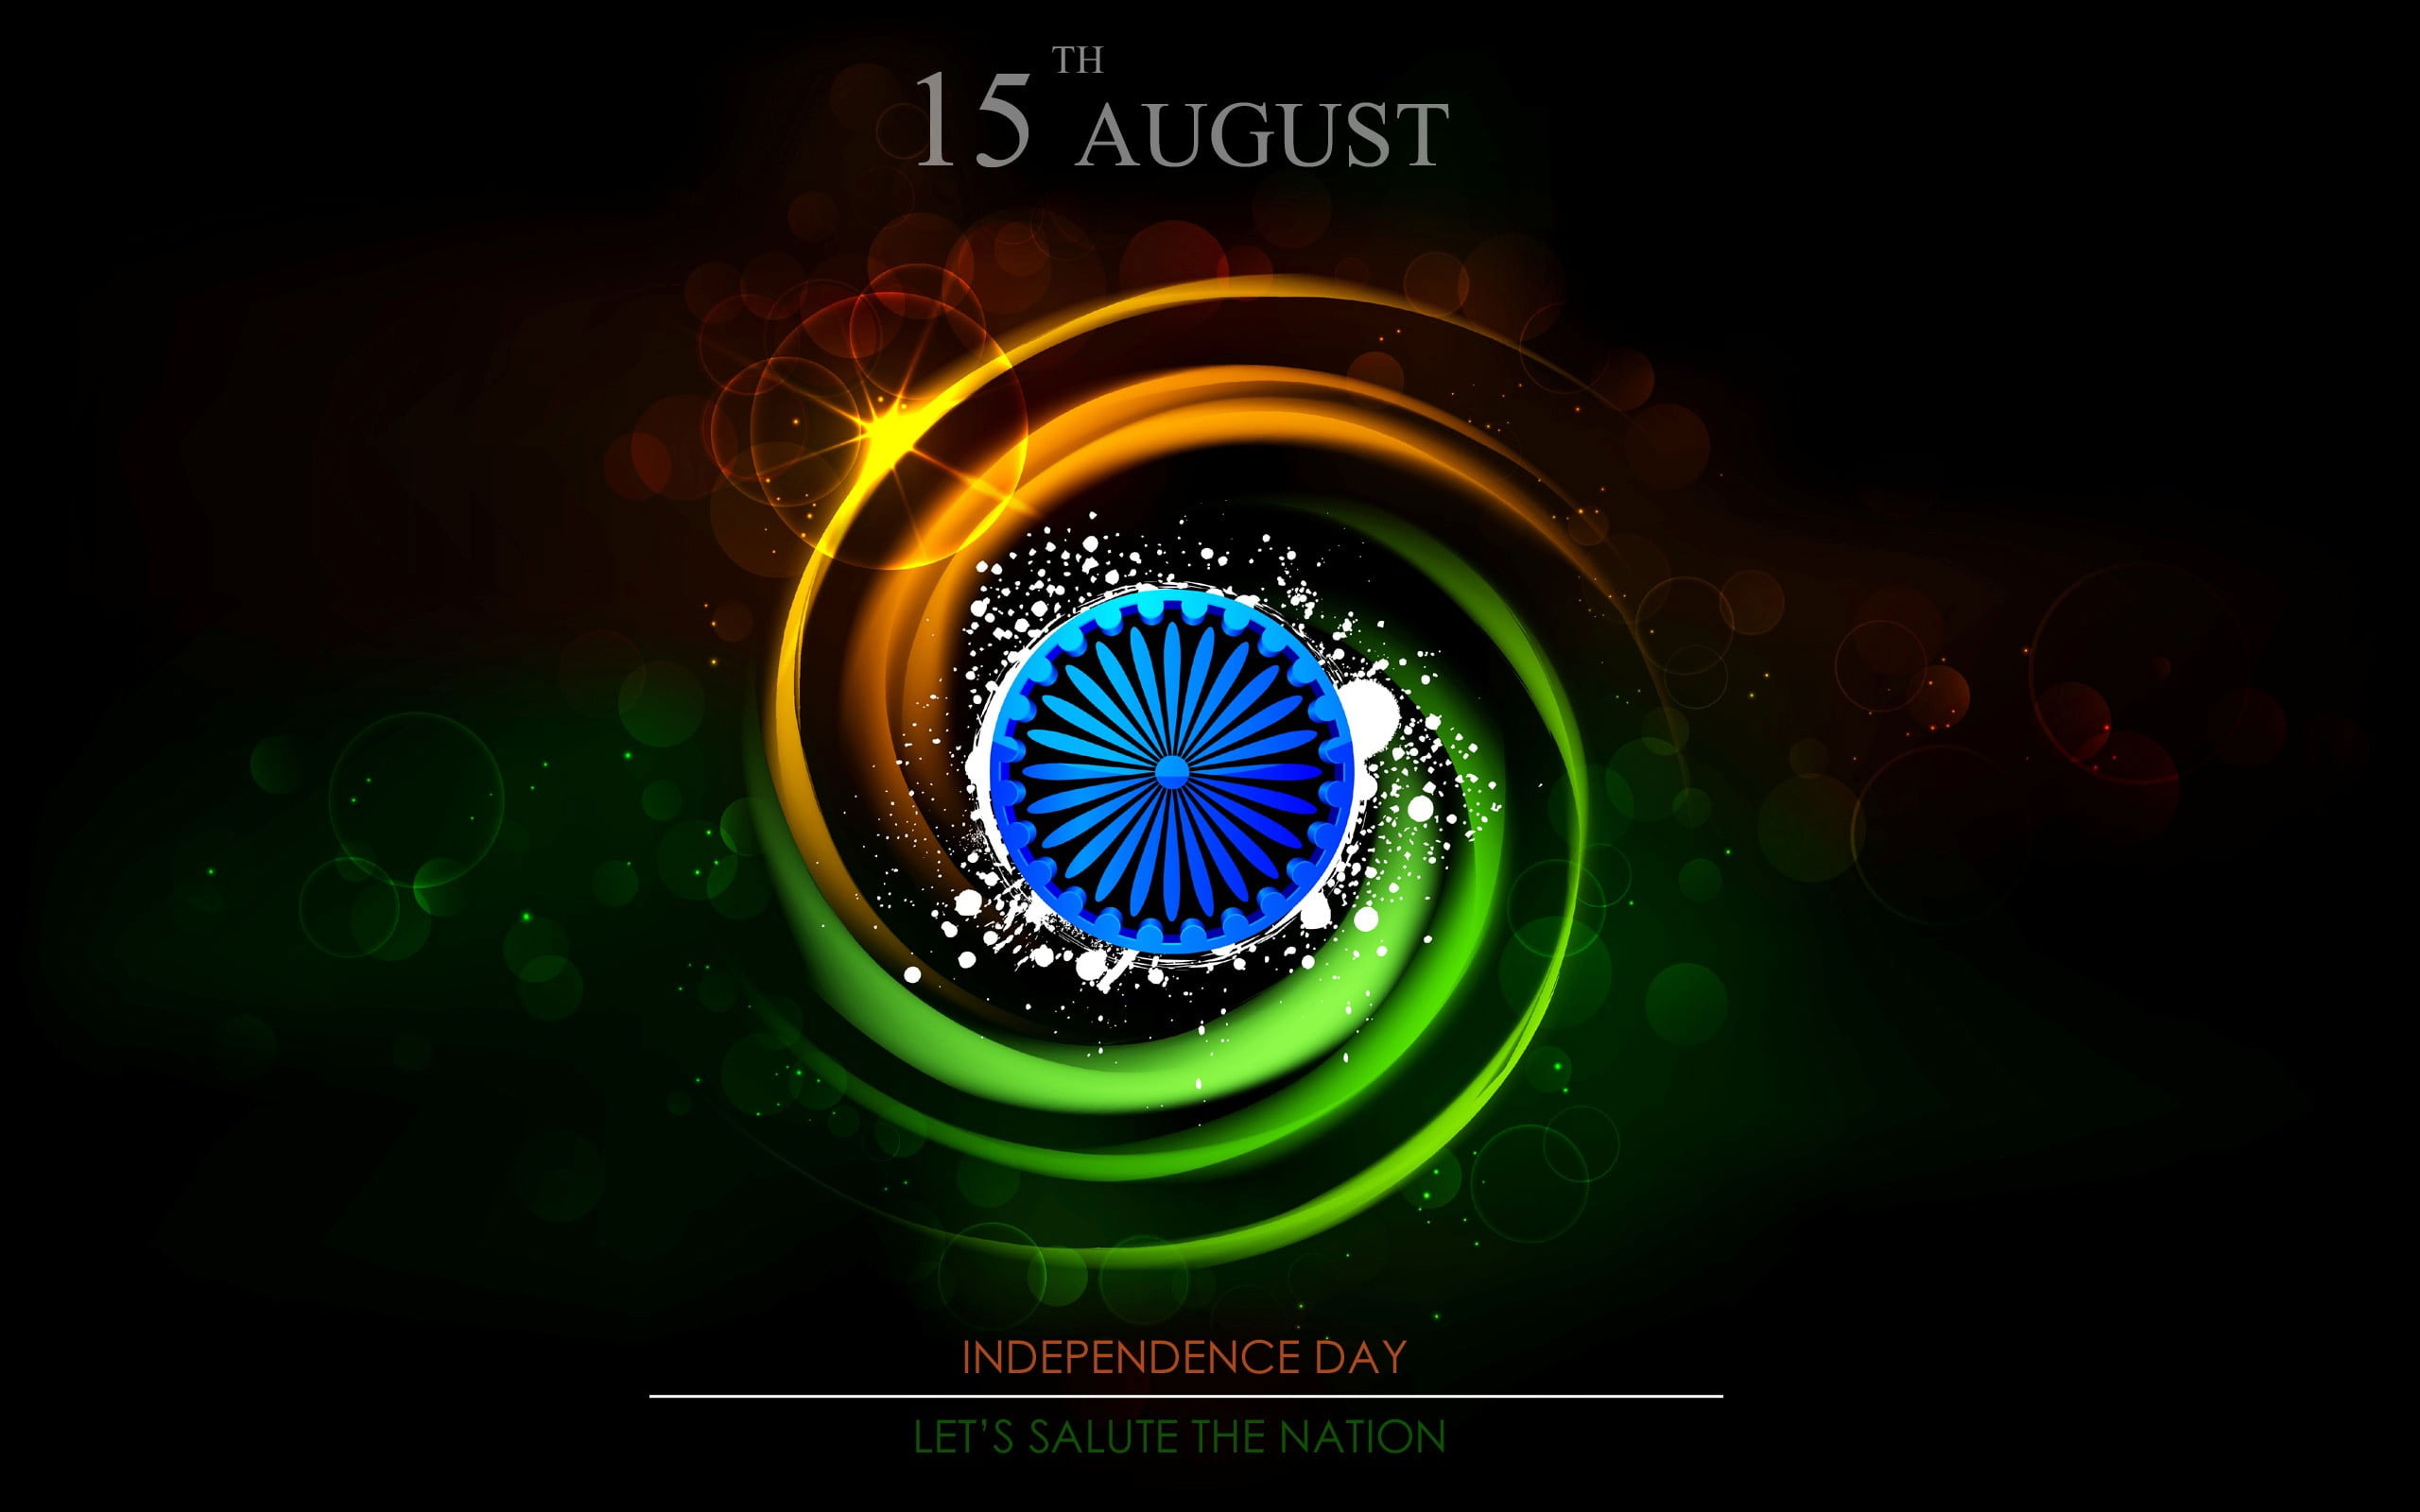 15 August Lets Salute The Nation Wallpaper, Happy Diwali Independence Day  Illustration - Wallpaperforu